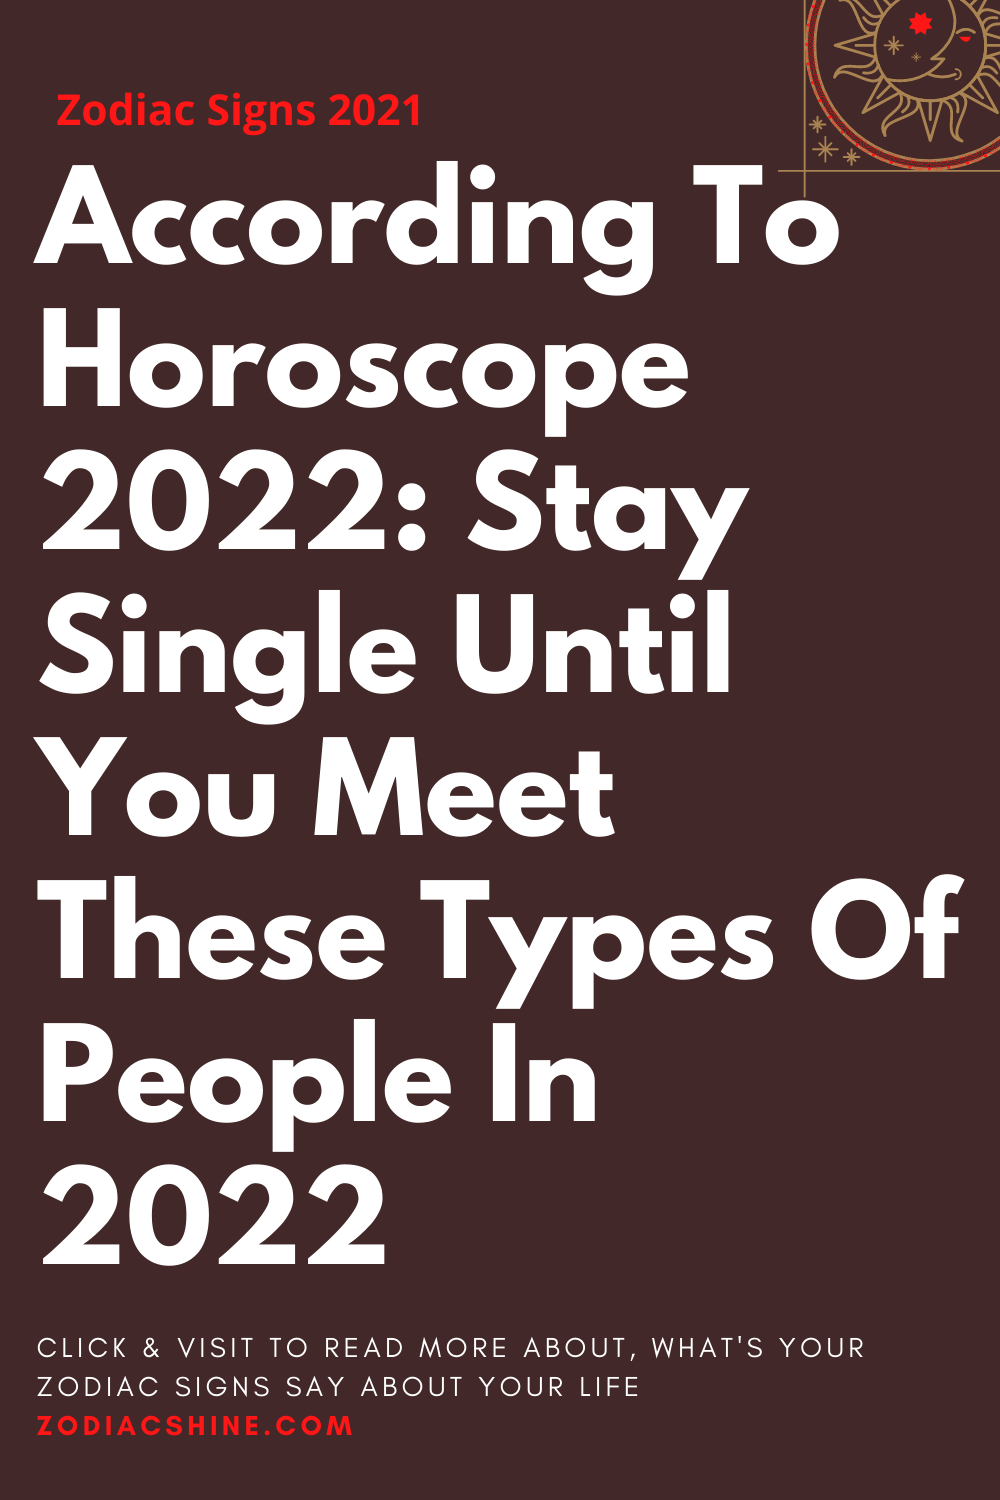 According To Horoscope 2022: Stay Single Until You Meet These Types Of People In 2022